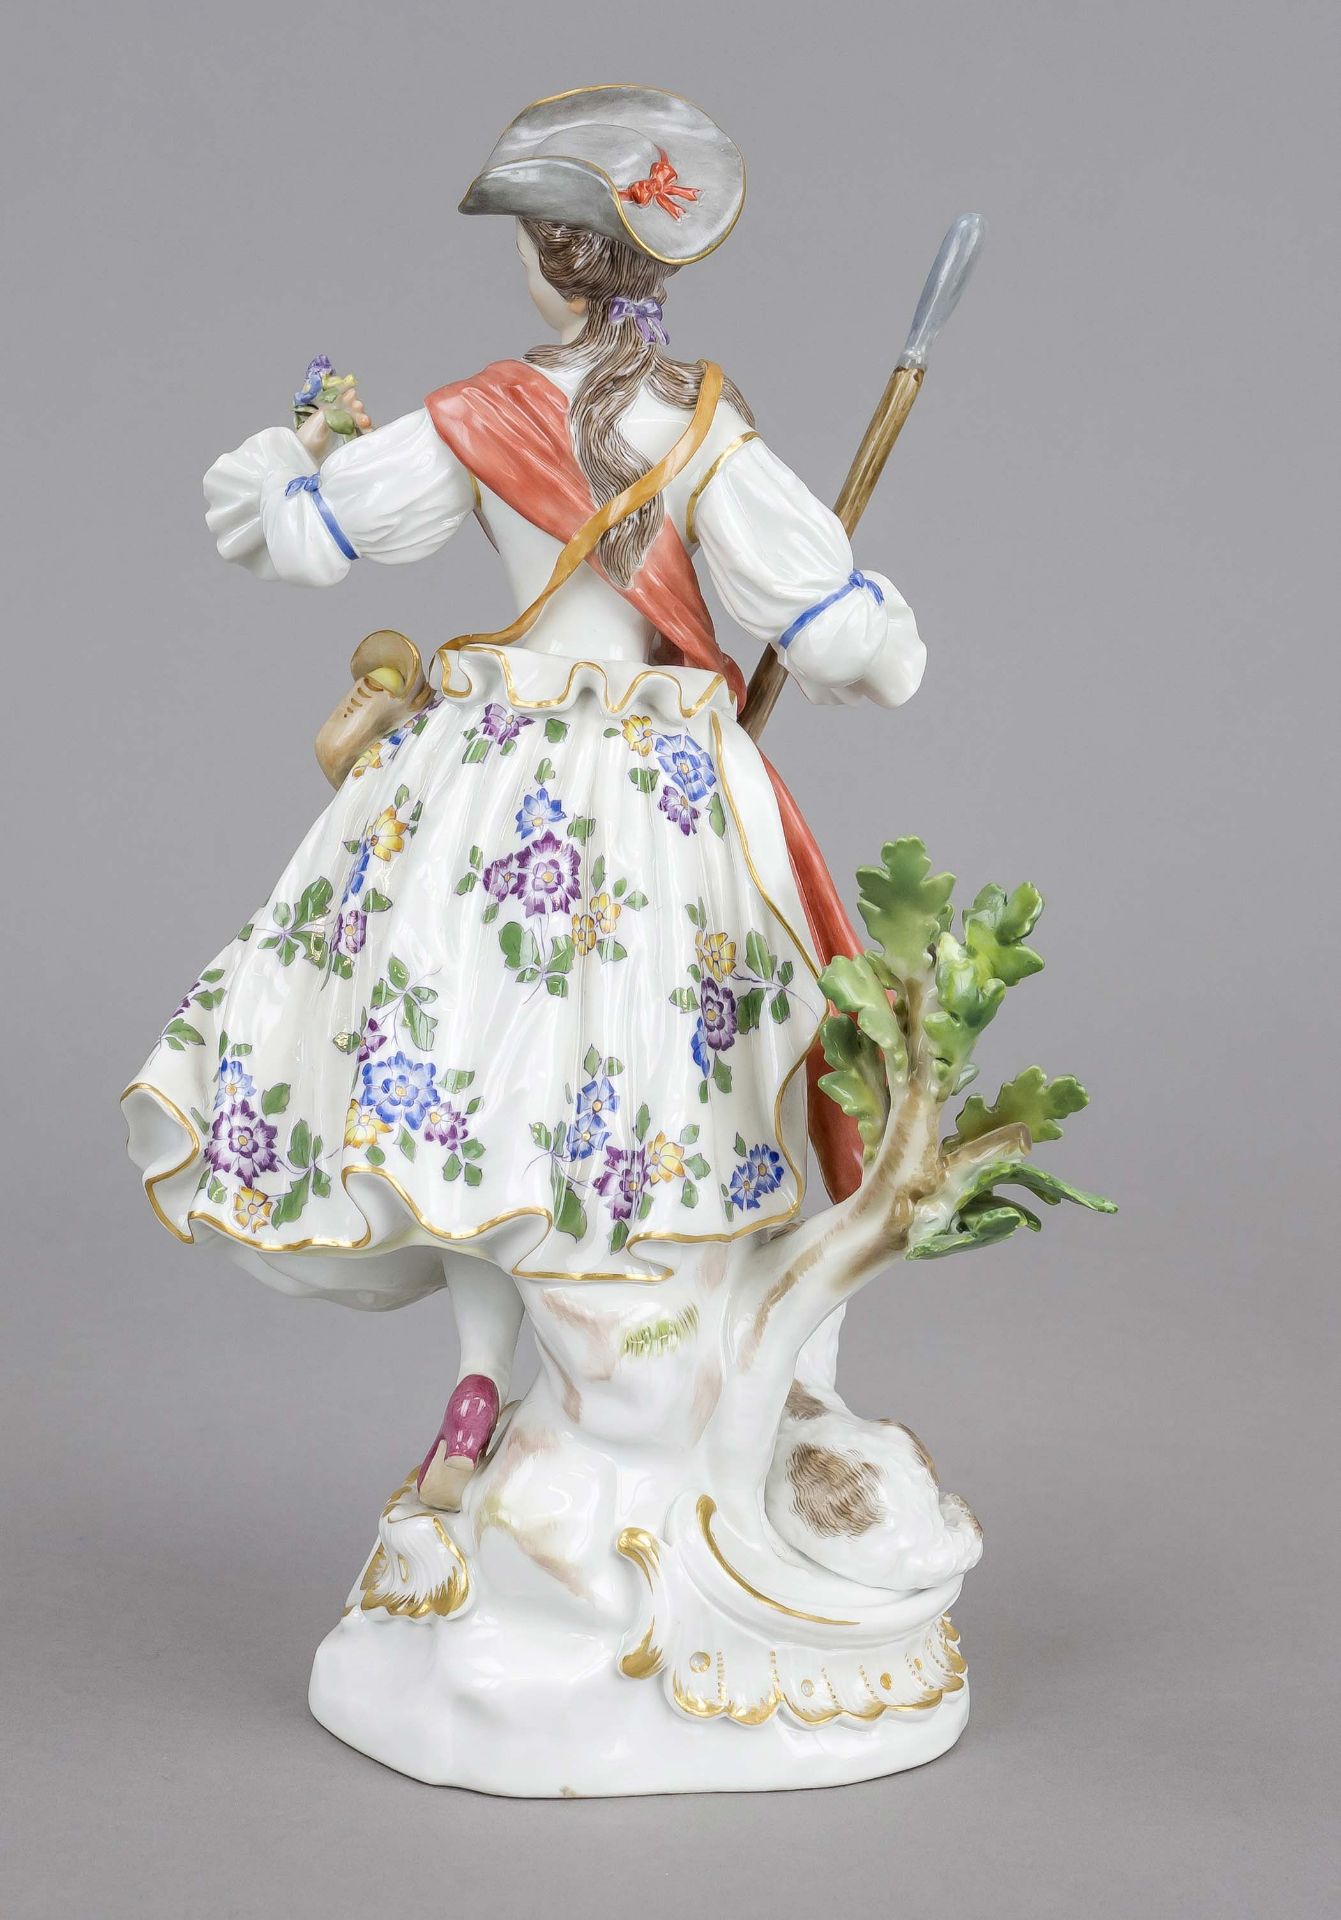 Shepherdess with staff, Meissen, after 1973, 2nd choice, model no. 61076, designed by Johann Joachim - Image 2 of 2